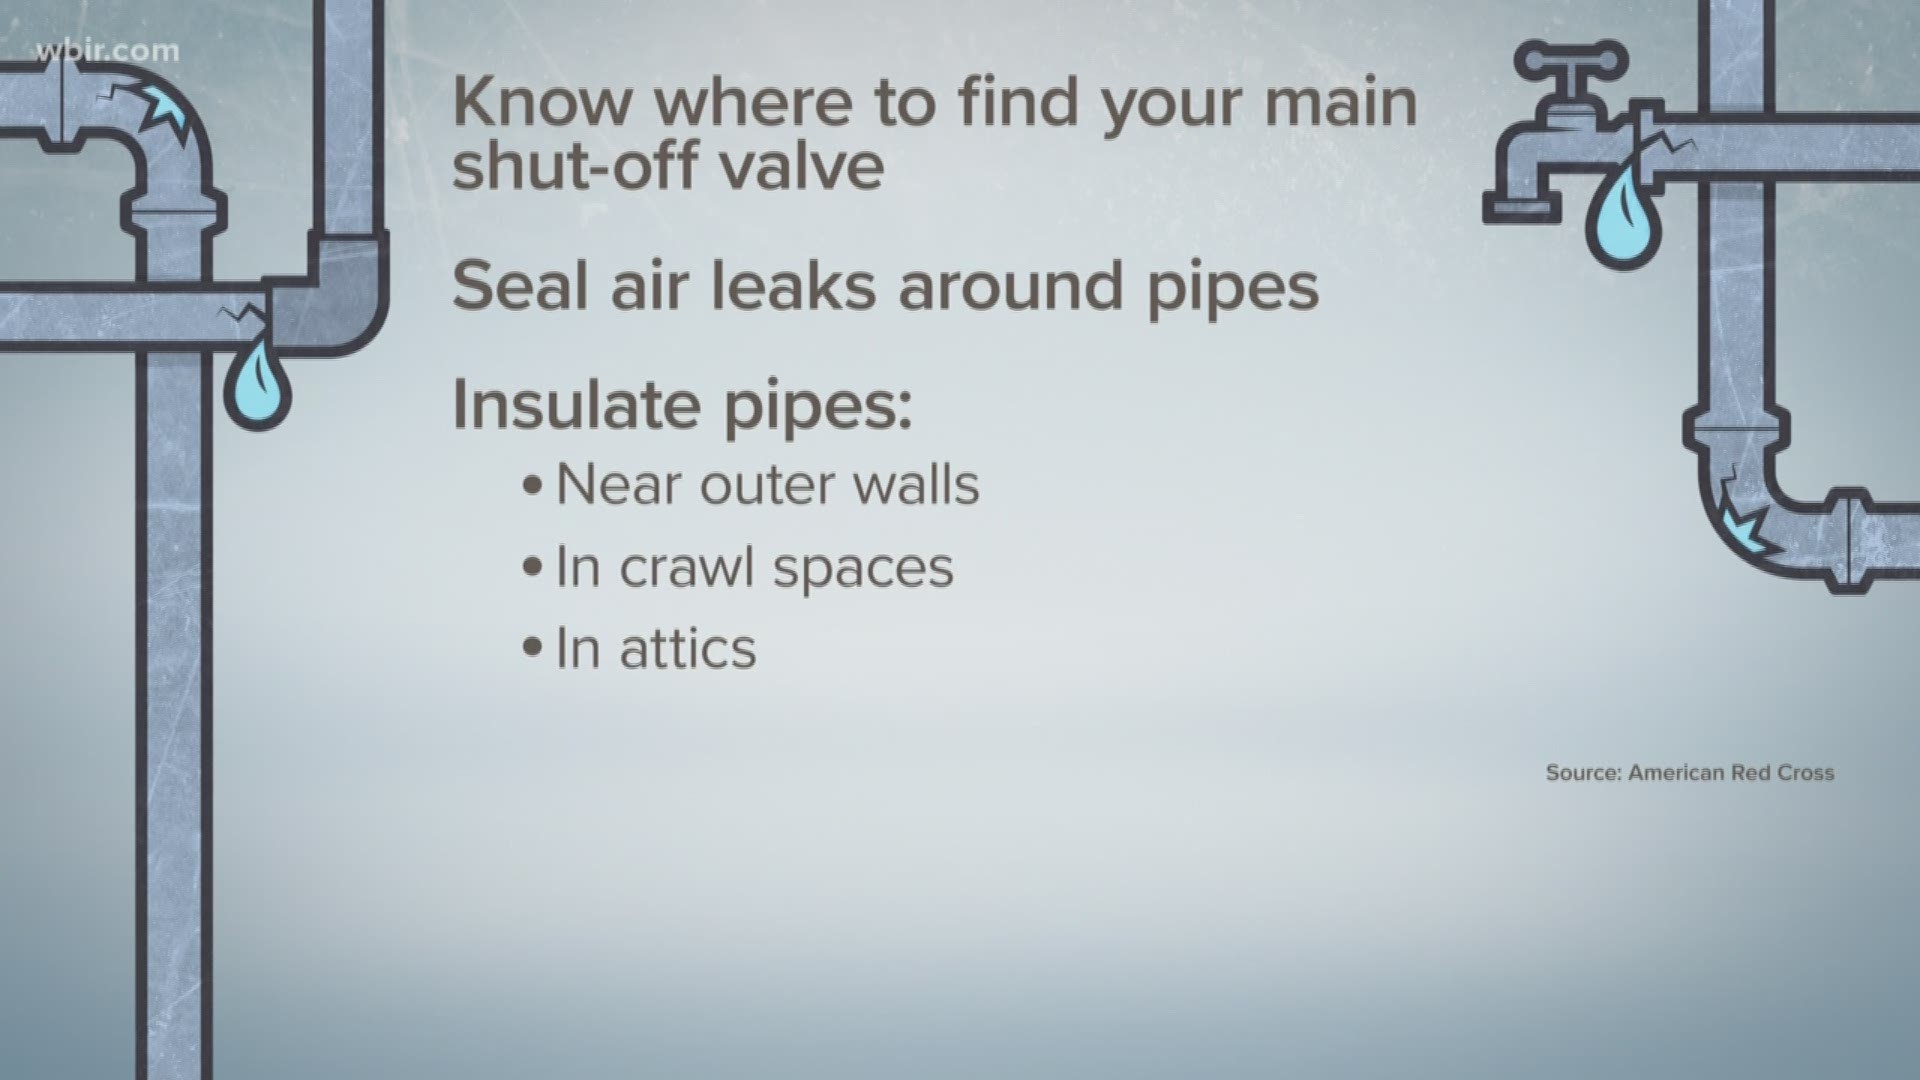 With this long period of cold temperatures -- make sure to protect the pipes in your home from freezing.